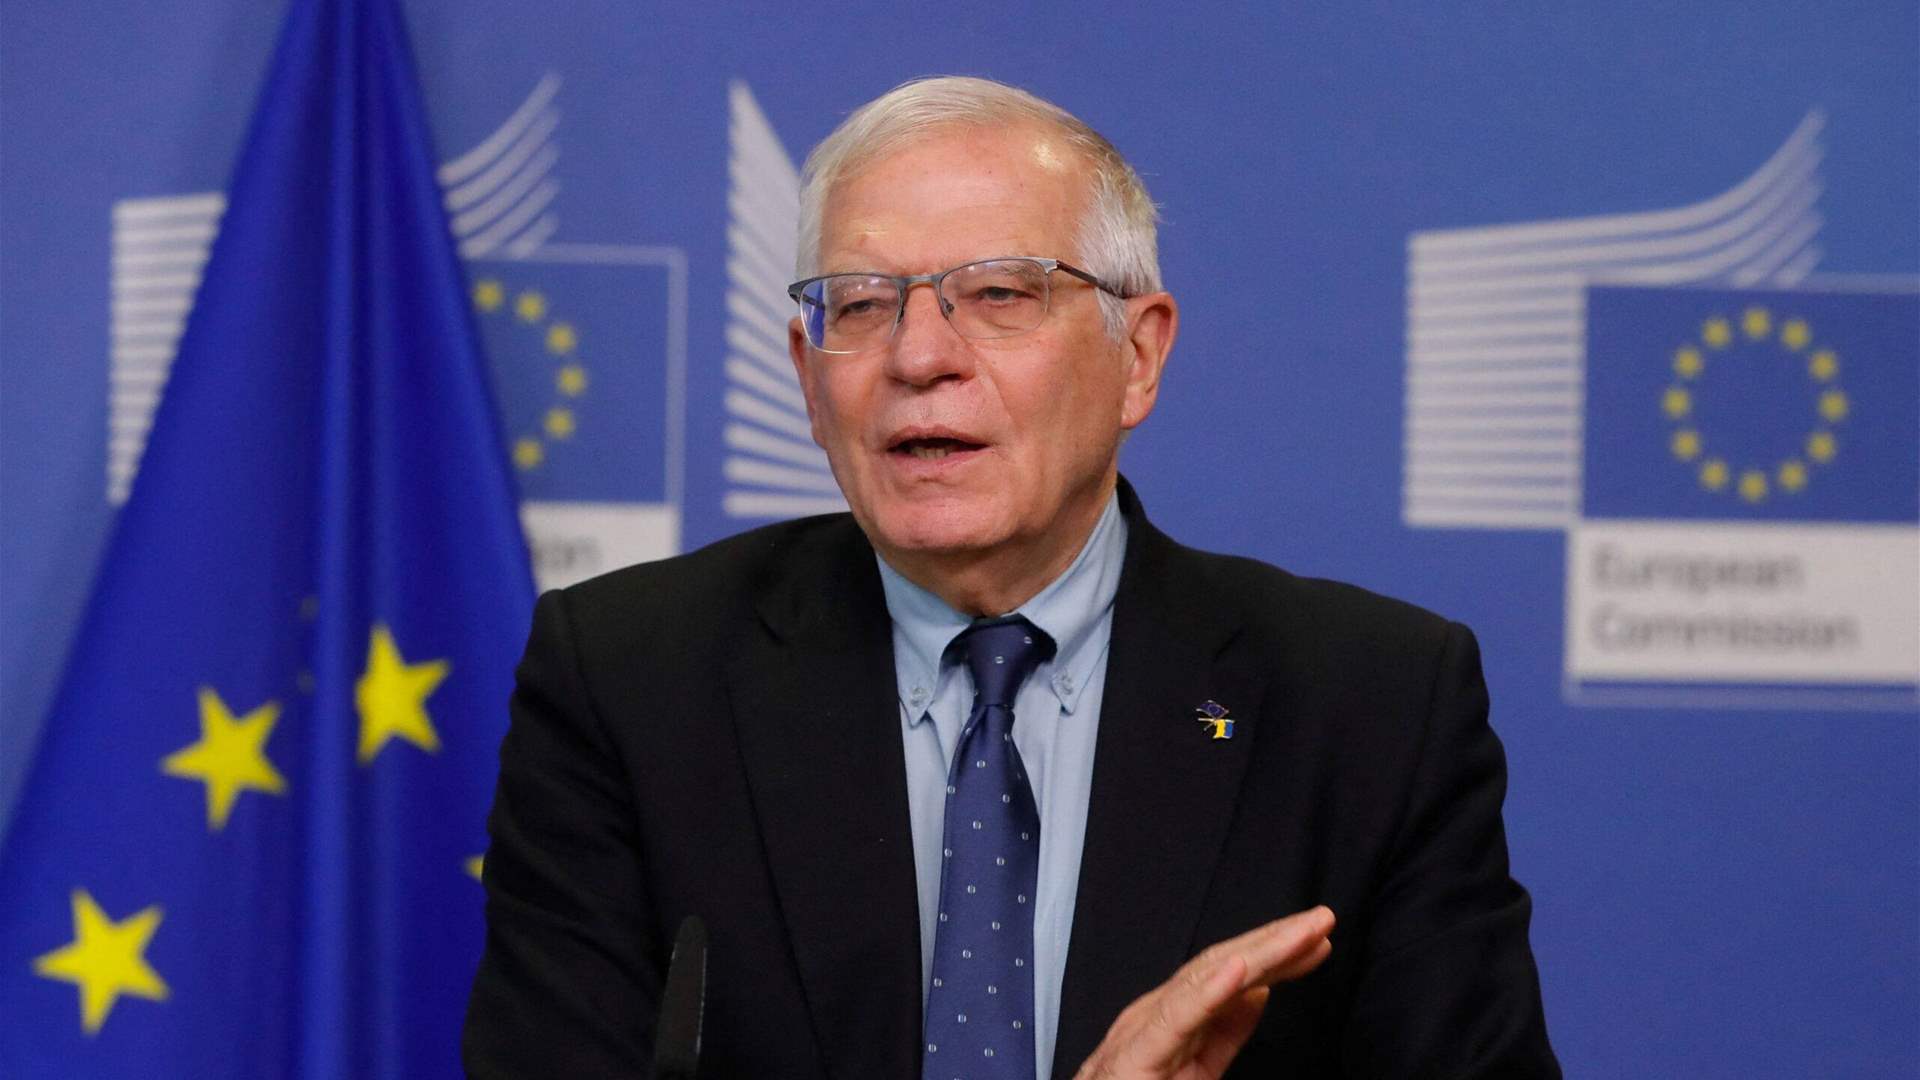 Borrell: EU leaders to call for a sustainable ceasefire in Gaza